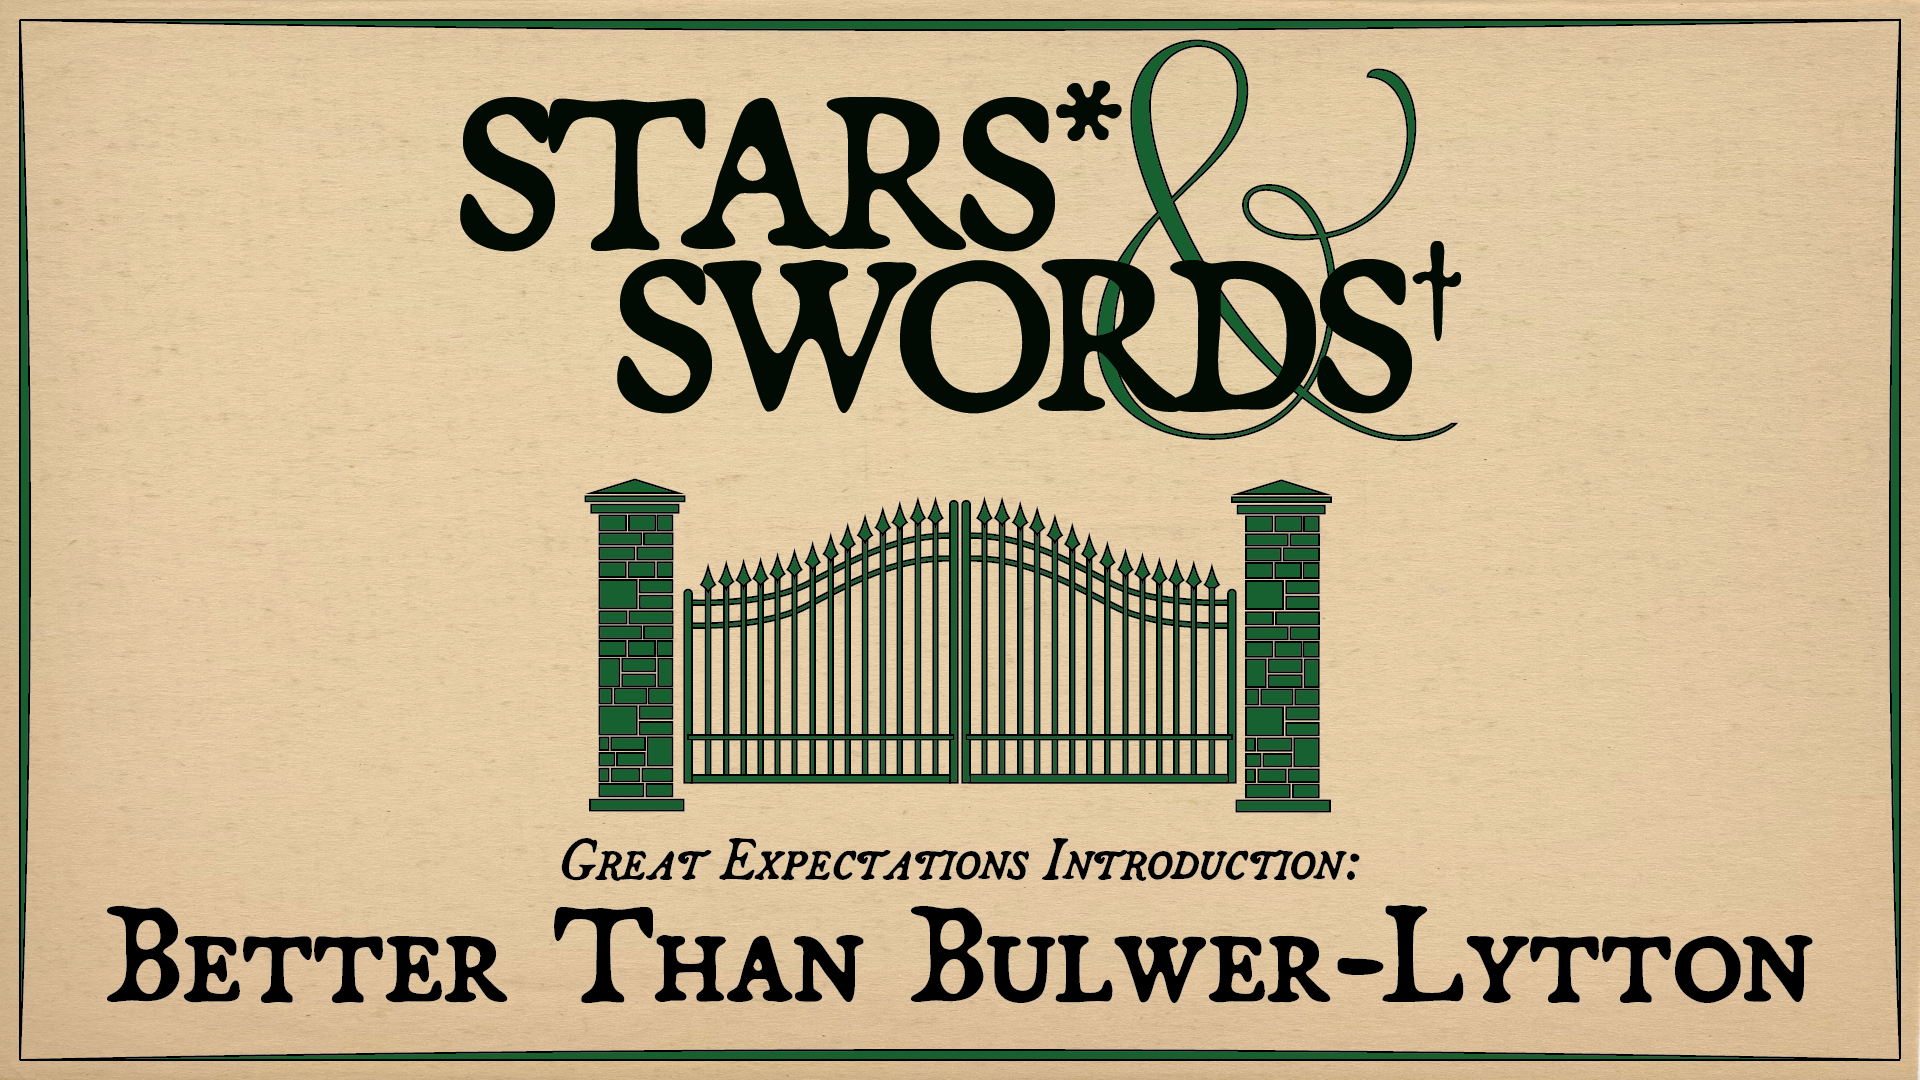 Great Expectations Introduction: Better Than Bulwer-Lytton